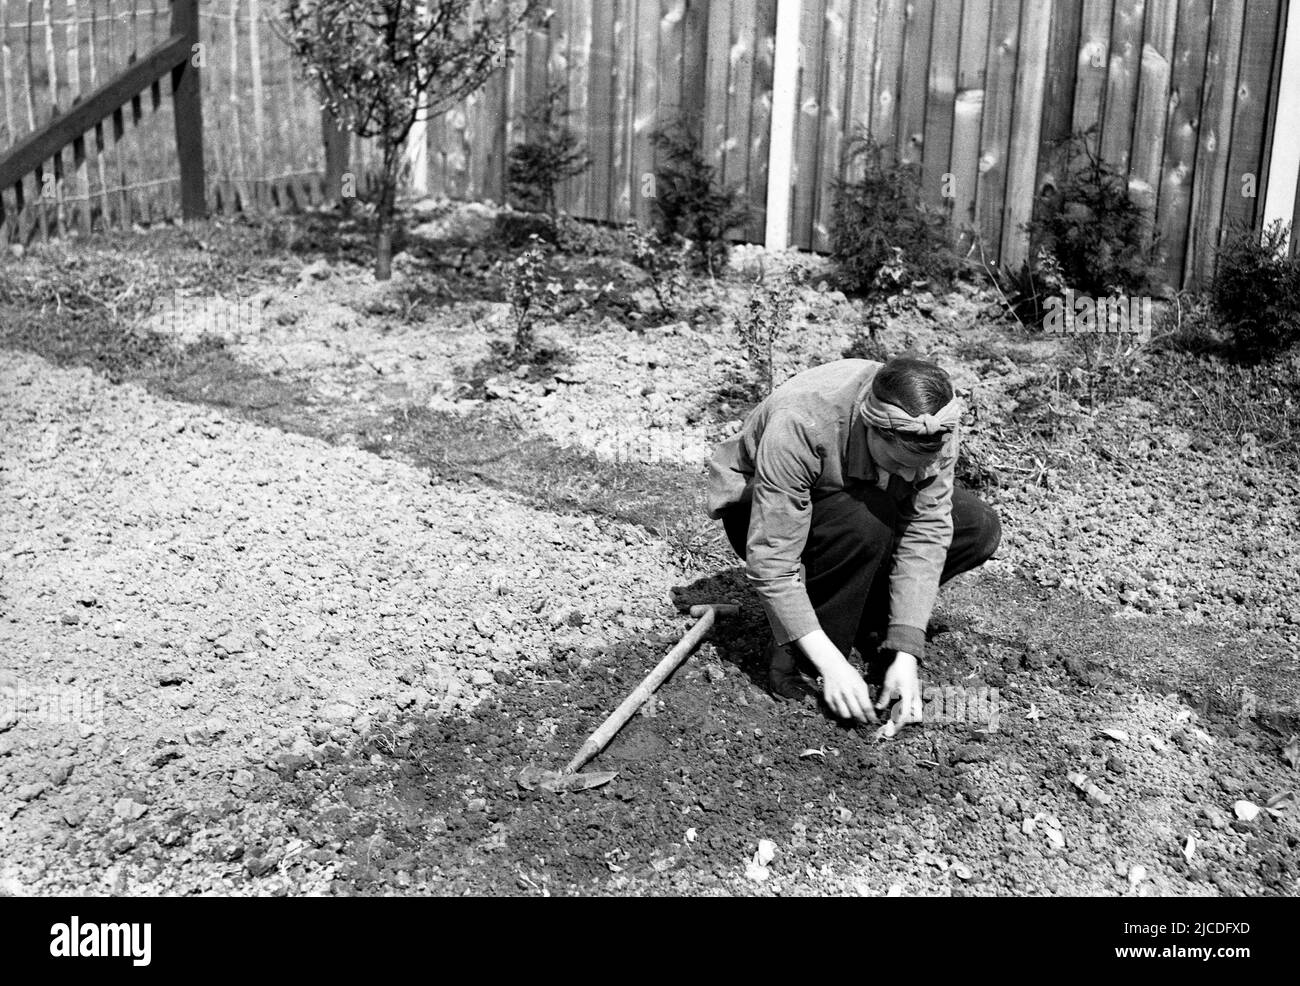 1950s, historical, outside on an empty area of dry gravelly earth, a woman kneeling, planting a bulb in a section of soil she has turned over, with her small spade, which is lying beside her. The spade, which has a half-moon blade, is also known as an edging knife, normally used for lawn edges. Stock Photo